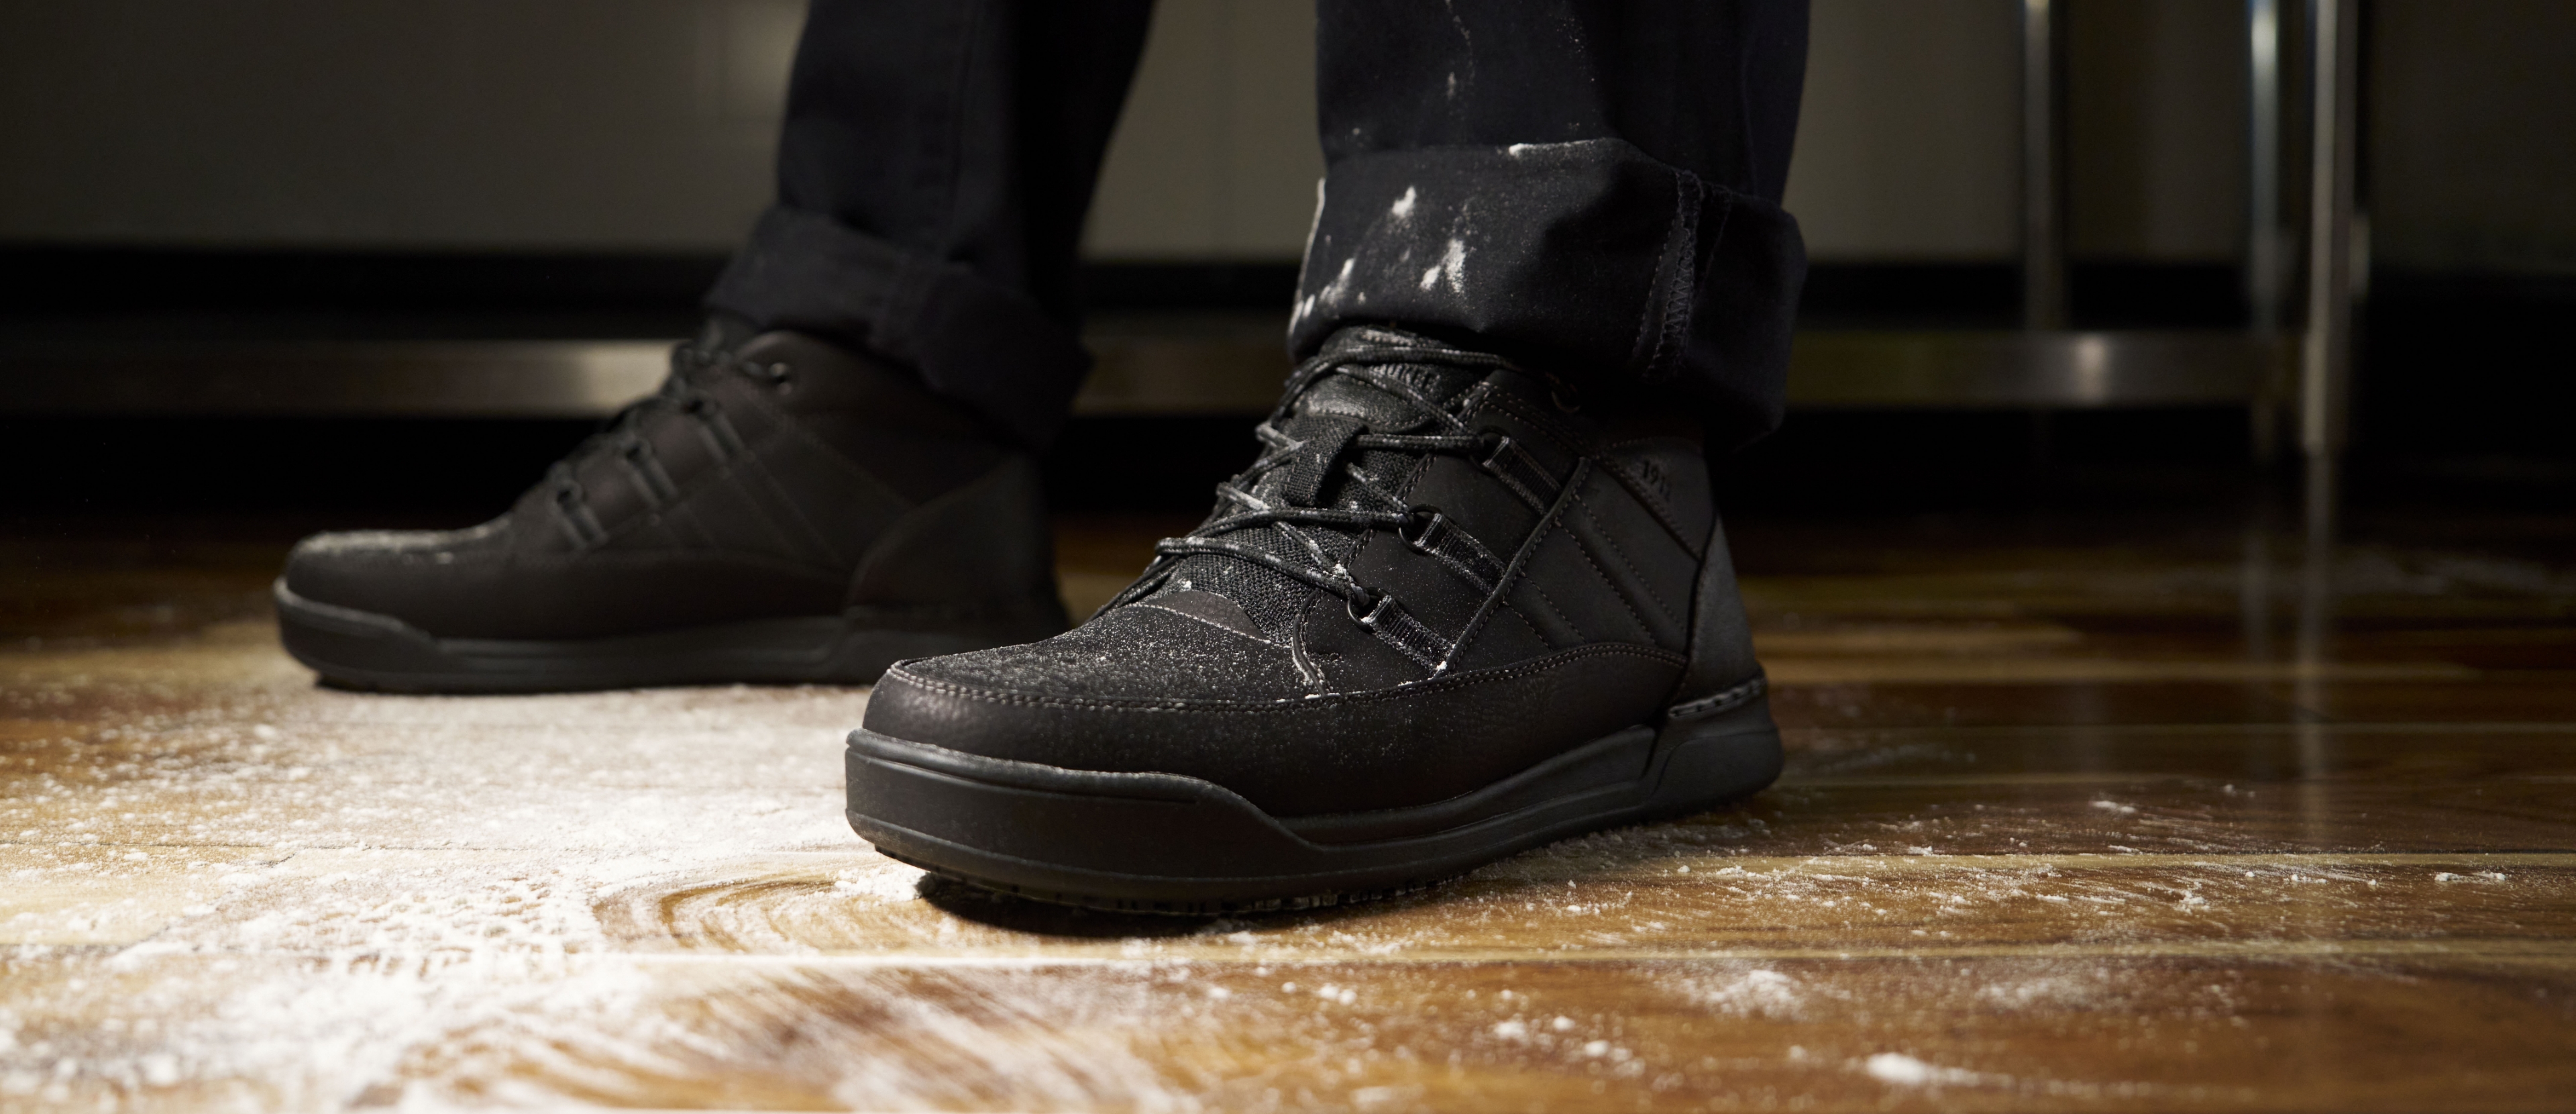 Click to shop Chef Adam's picks! Image features the Tour Work boot. 